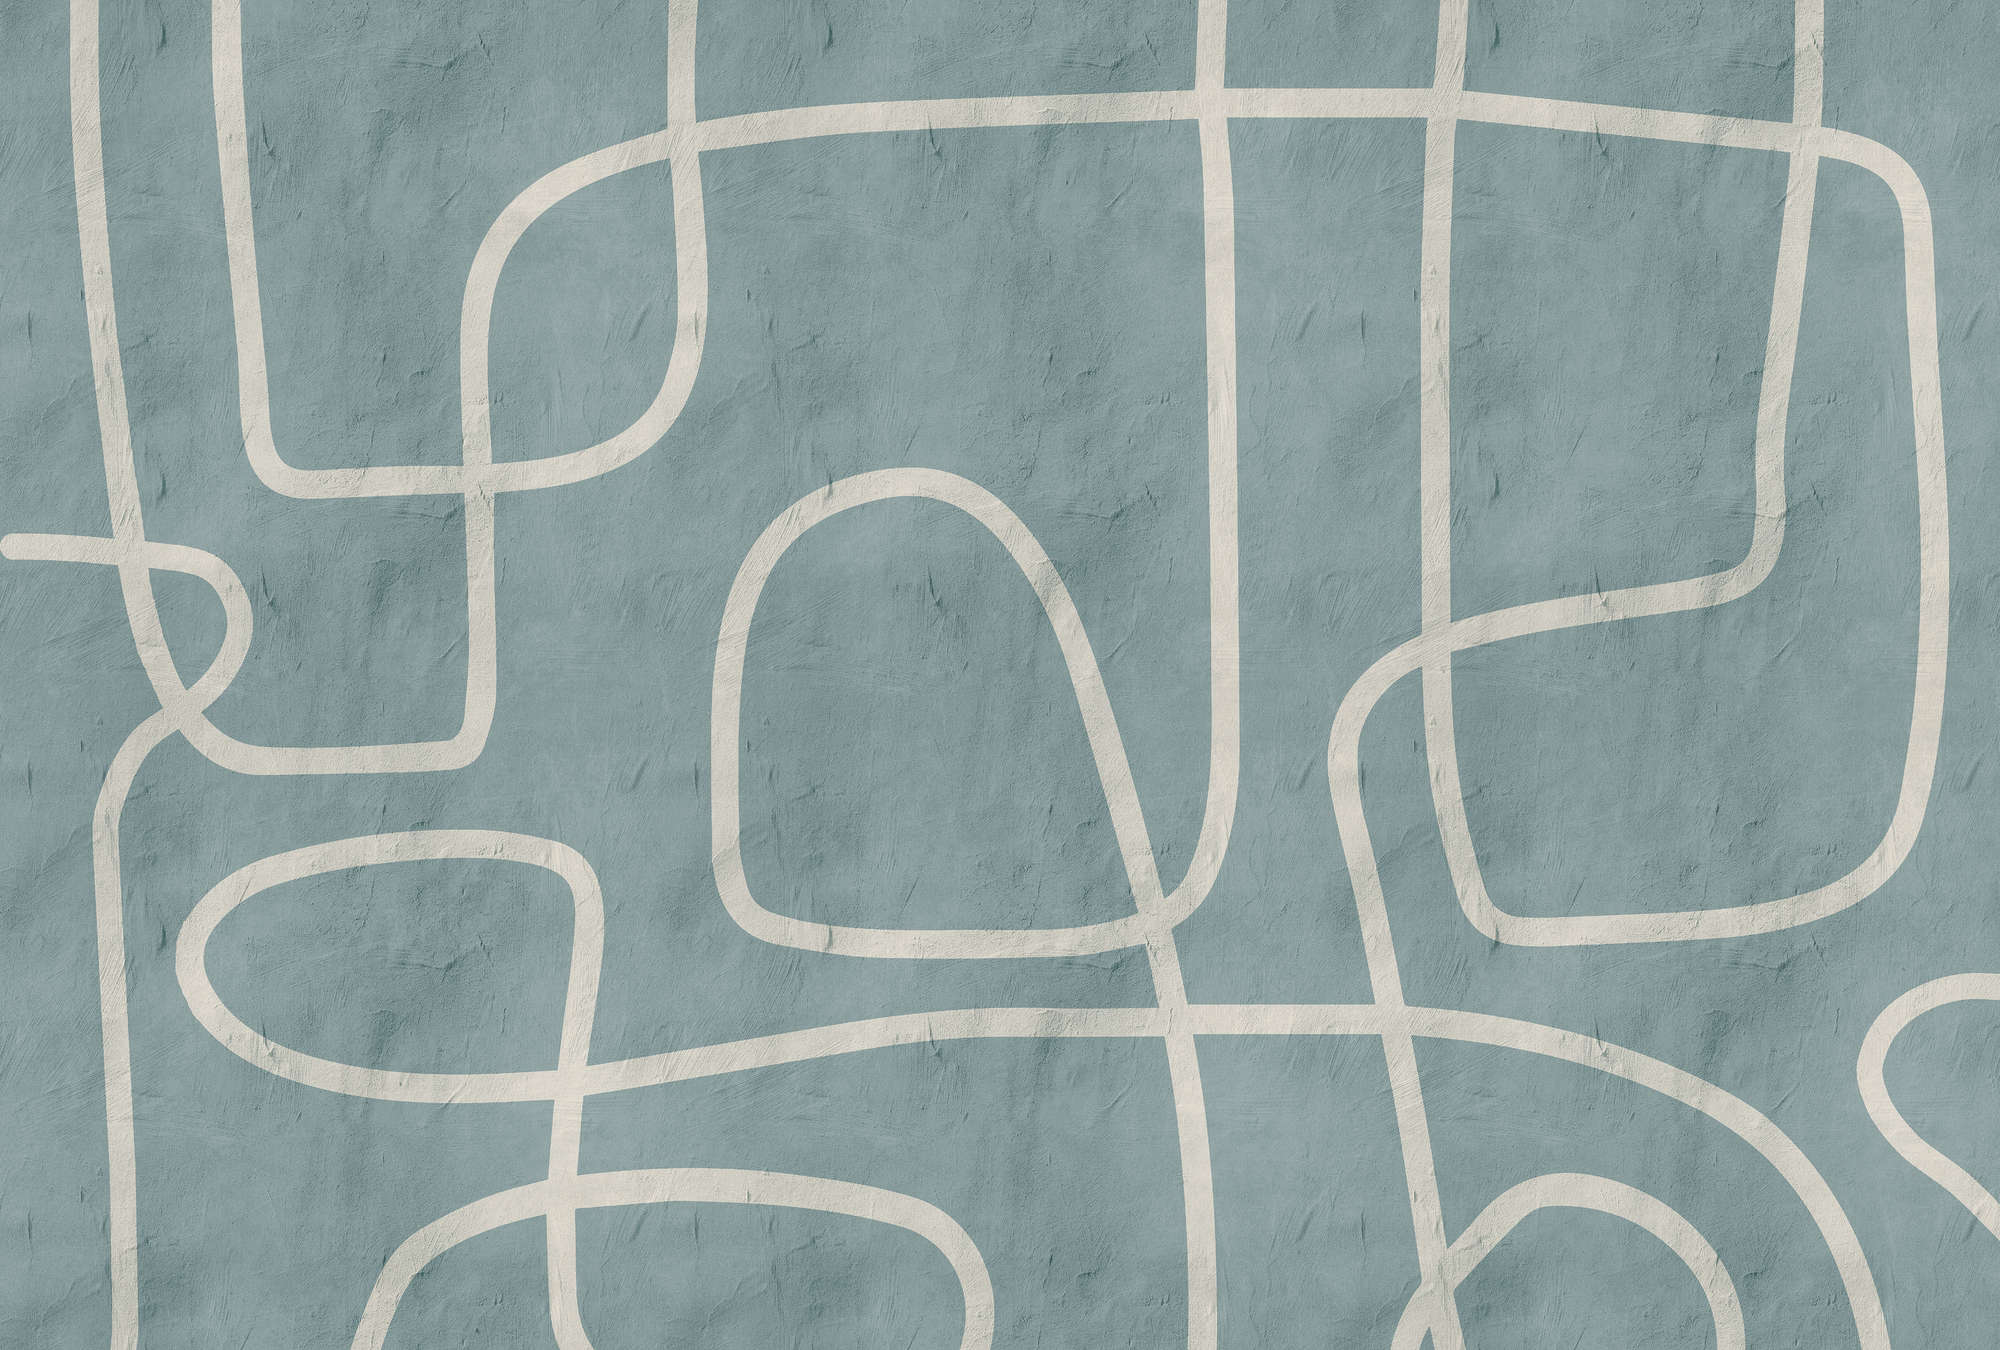             Serengeti 4 - mural clay wall in light blue with line pattern
        